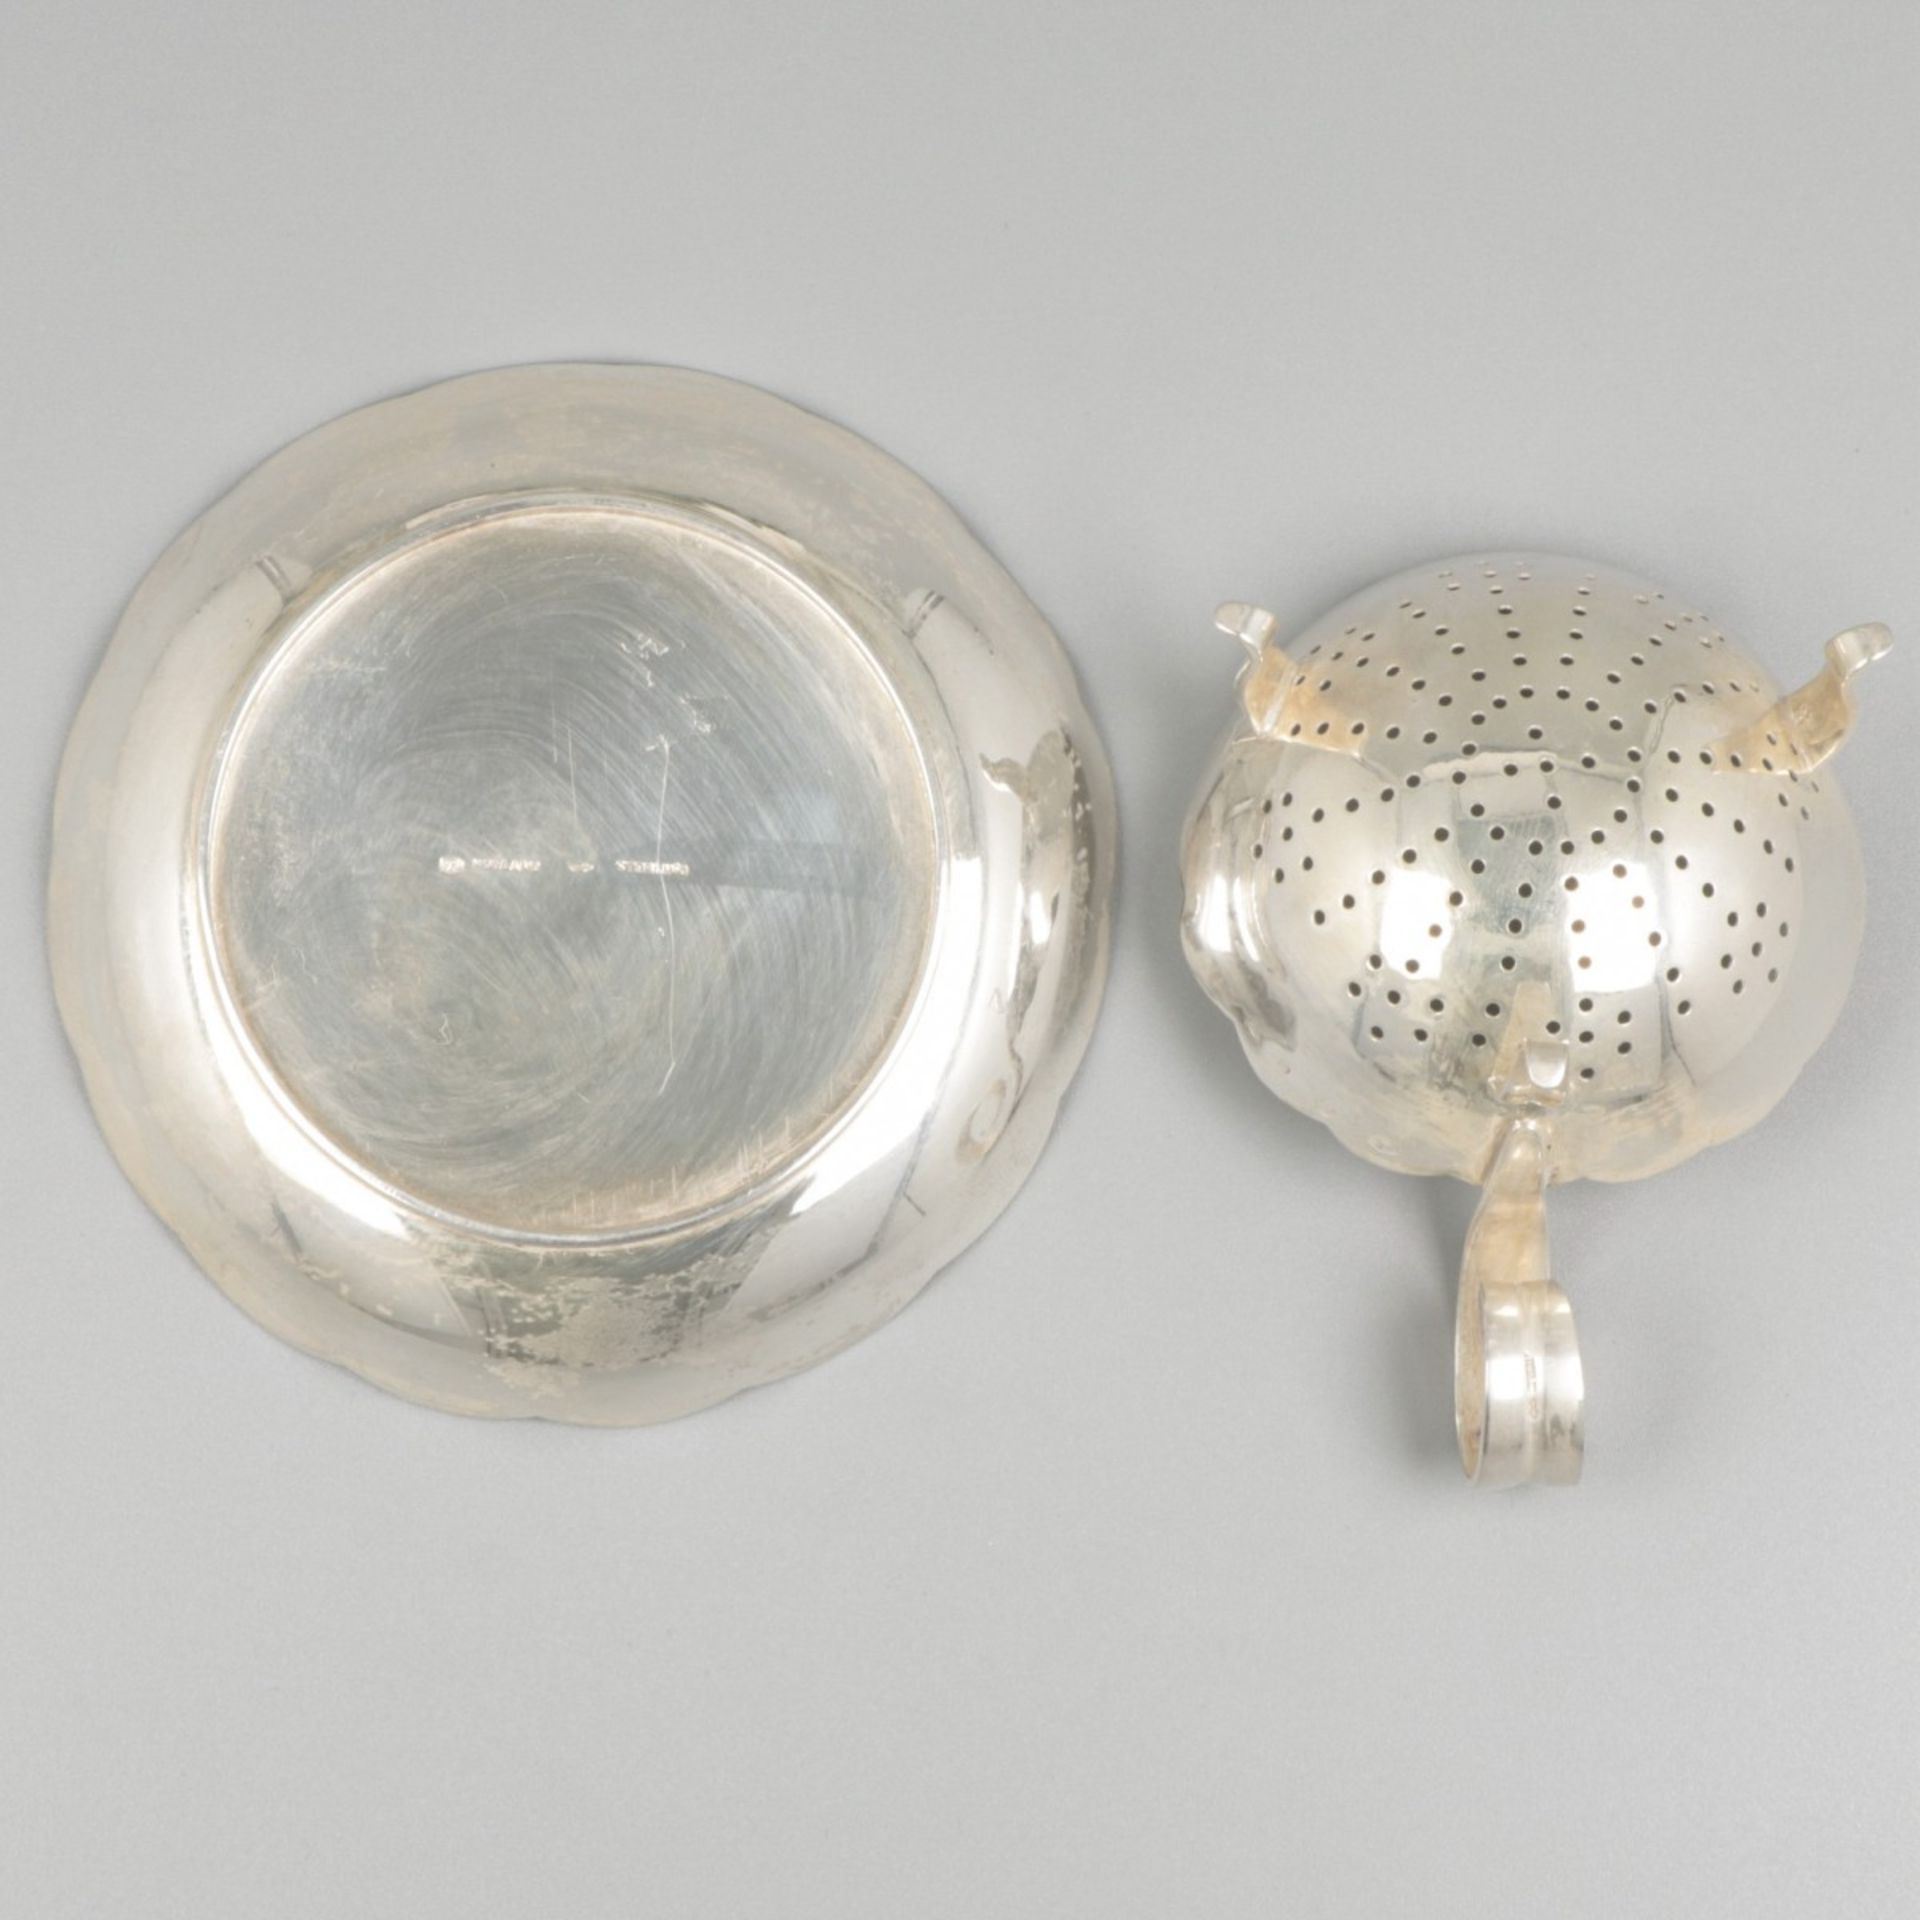 Tea strainer & drip tray silver. - Image 5 of 7